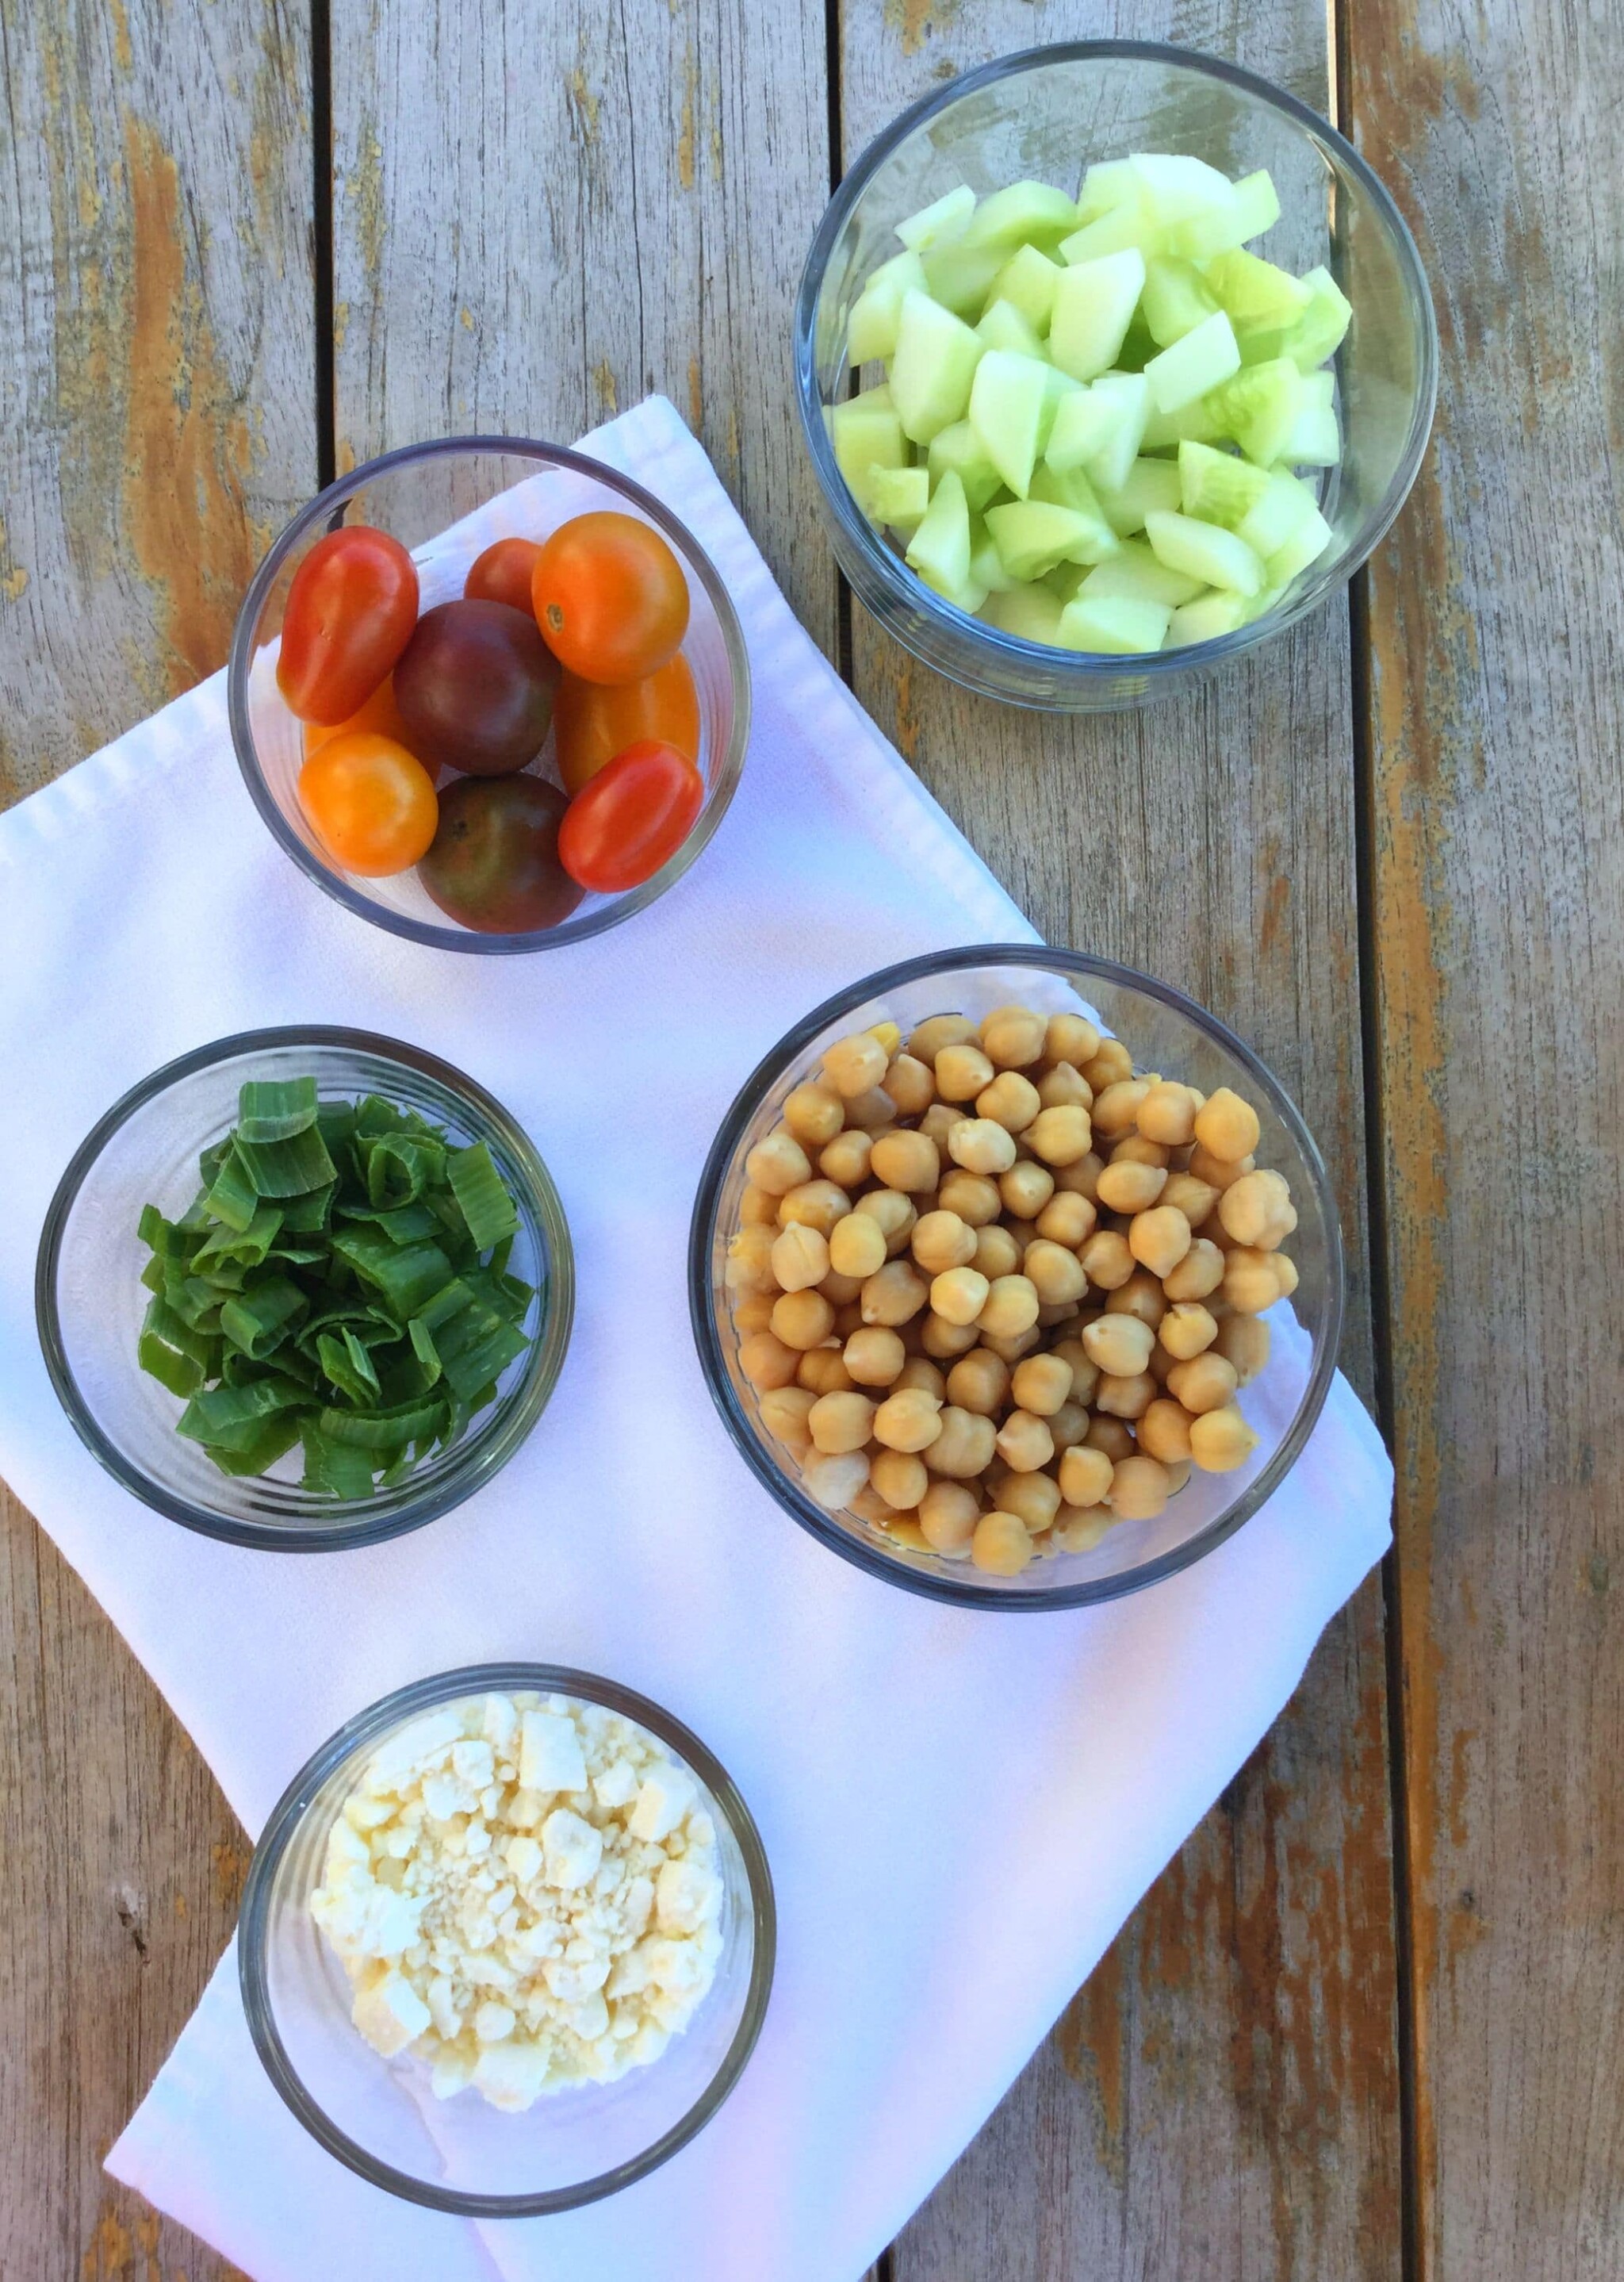 This mediterranean chickpea salad is a fantastic option if you want to try something new, delicious and that can provide you with great nutrition in a light yet satisfying meal.